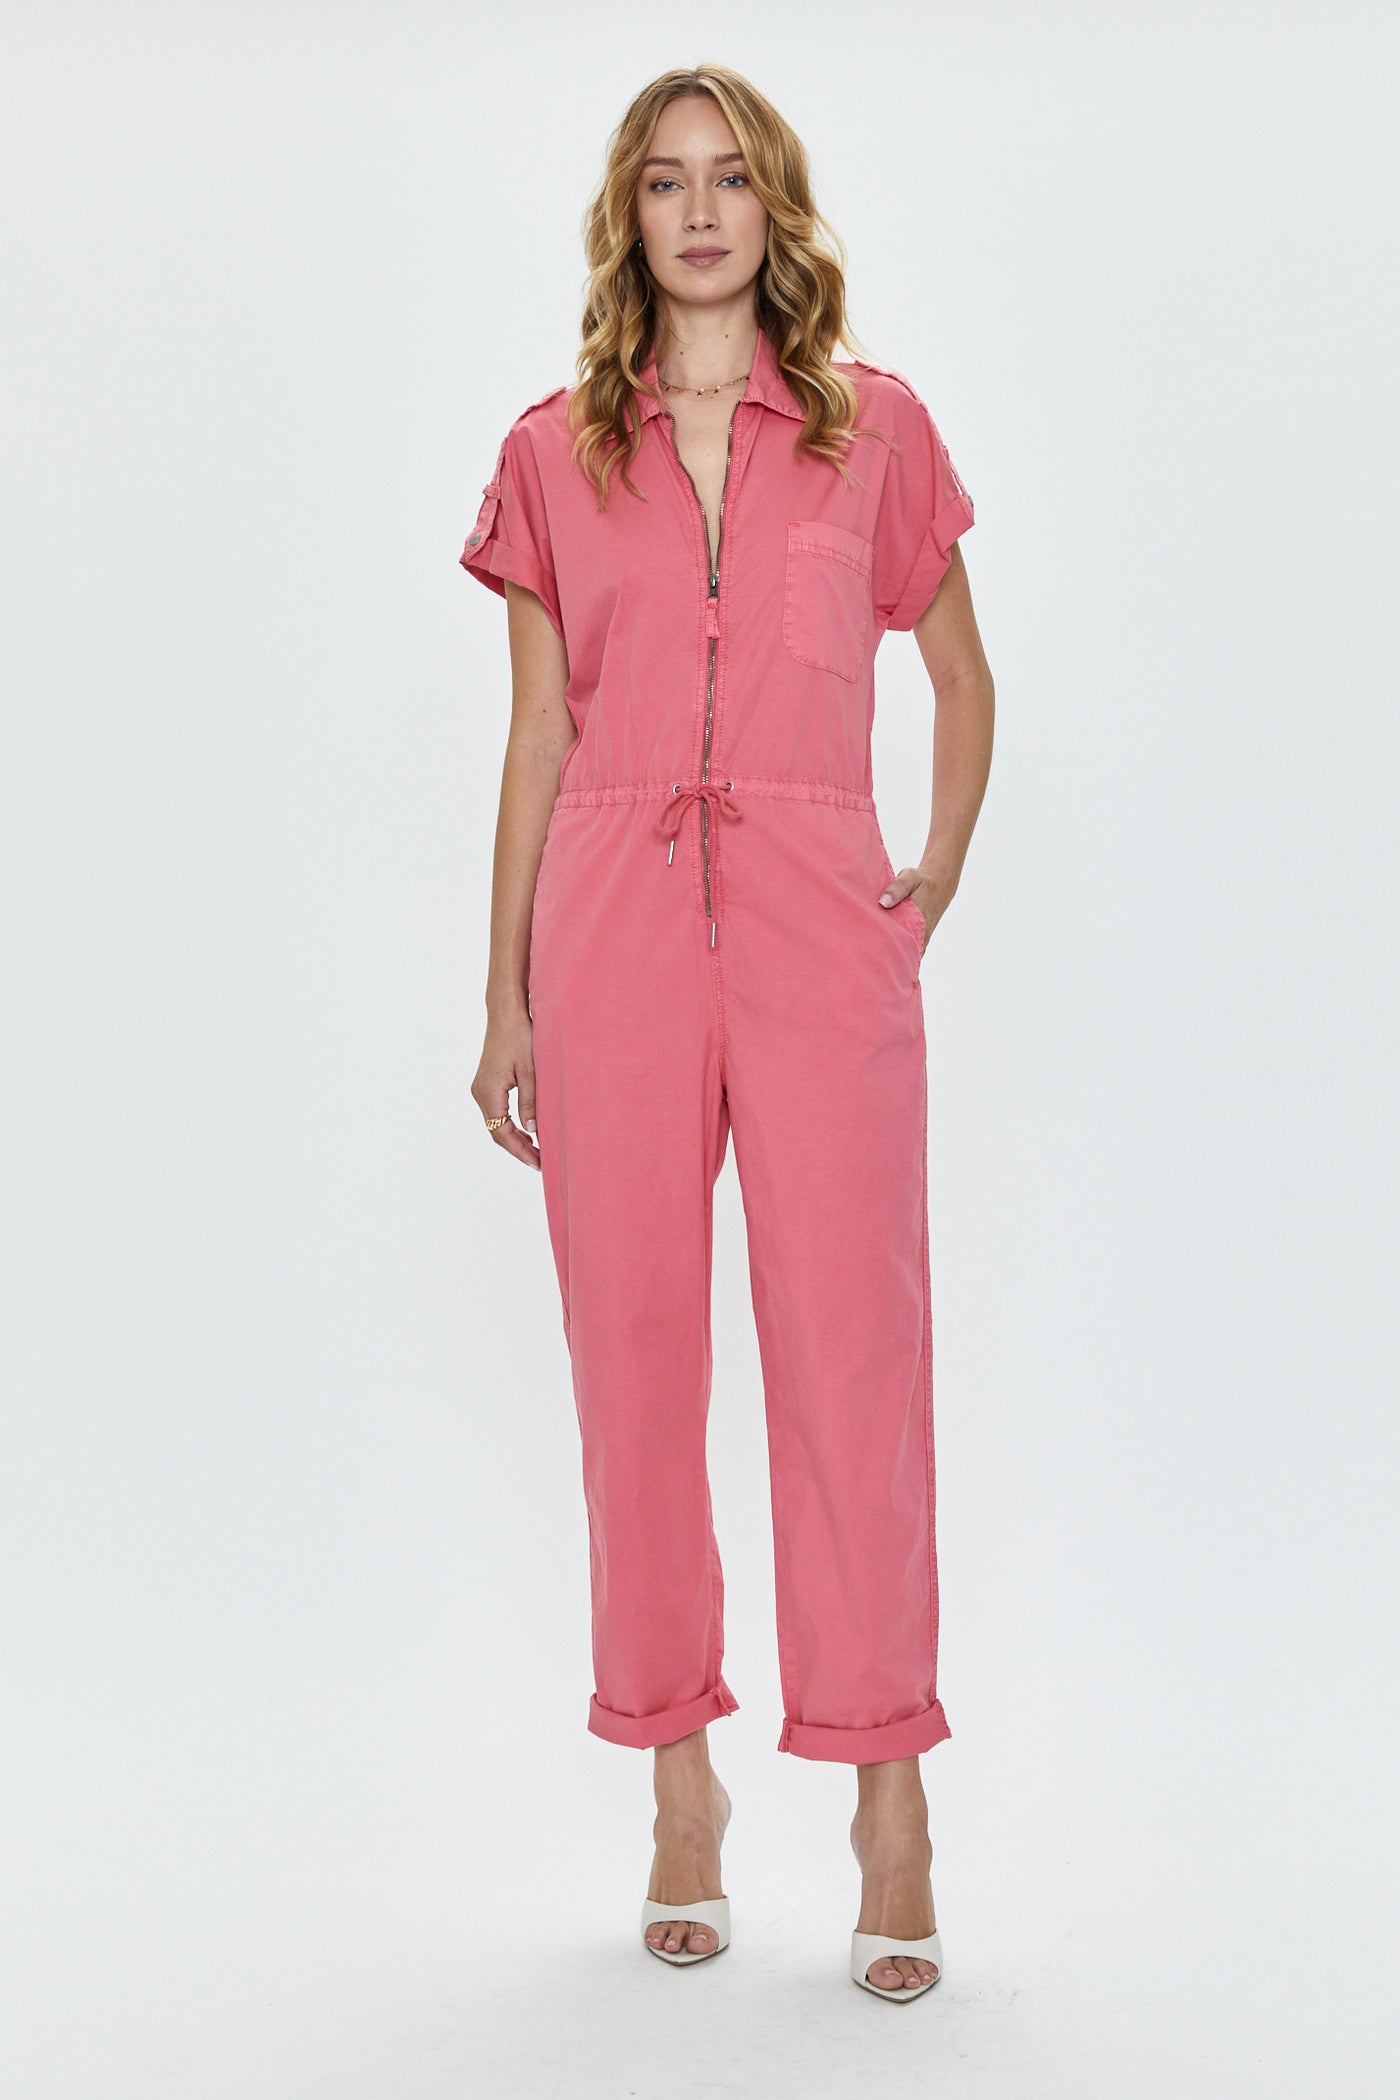 Bad Society Club velvet strappy bust cutout jumpsuit in pink | ASOS